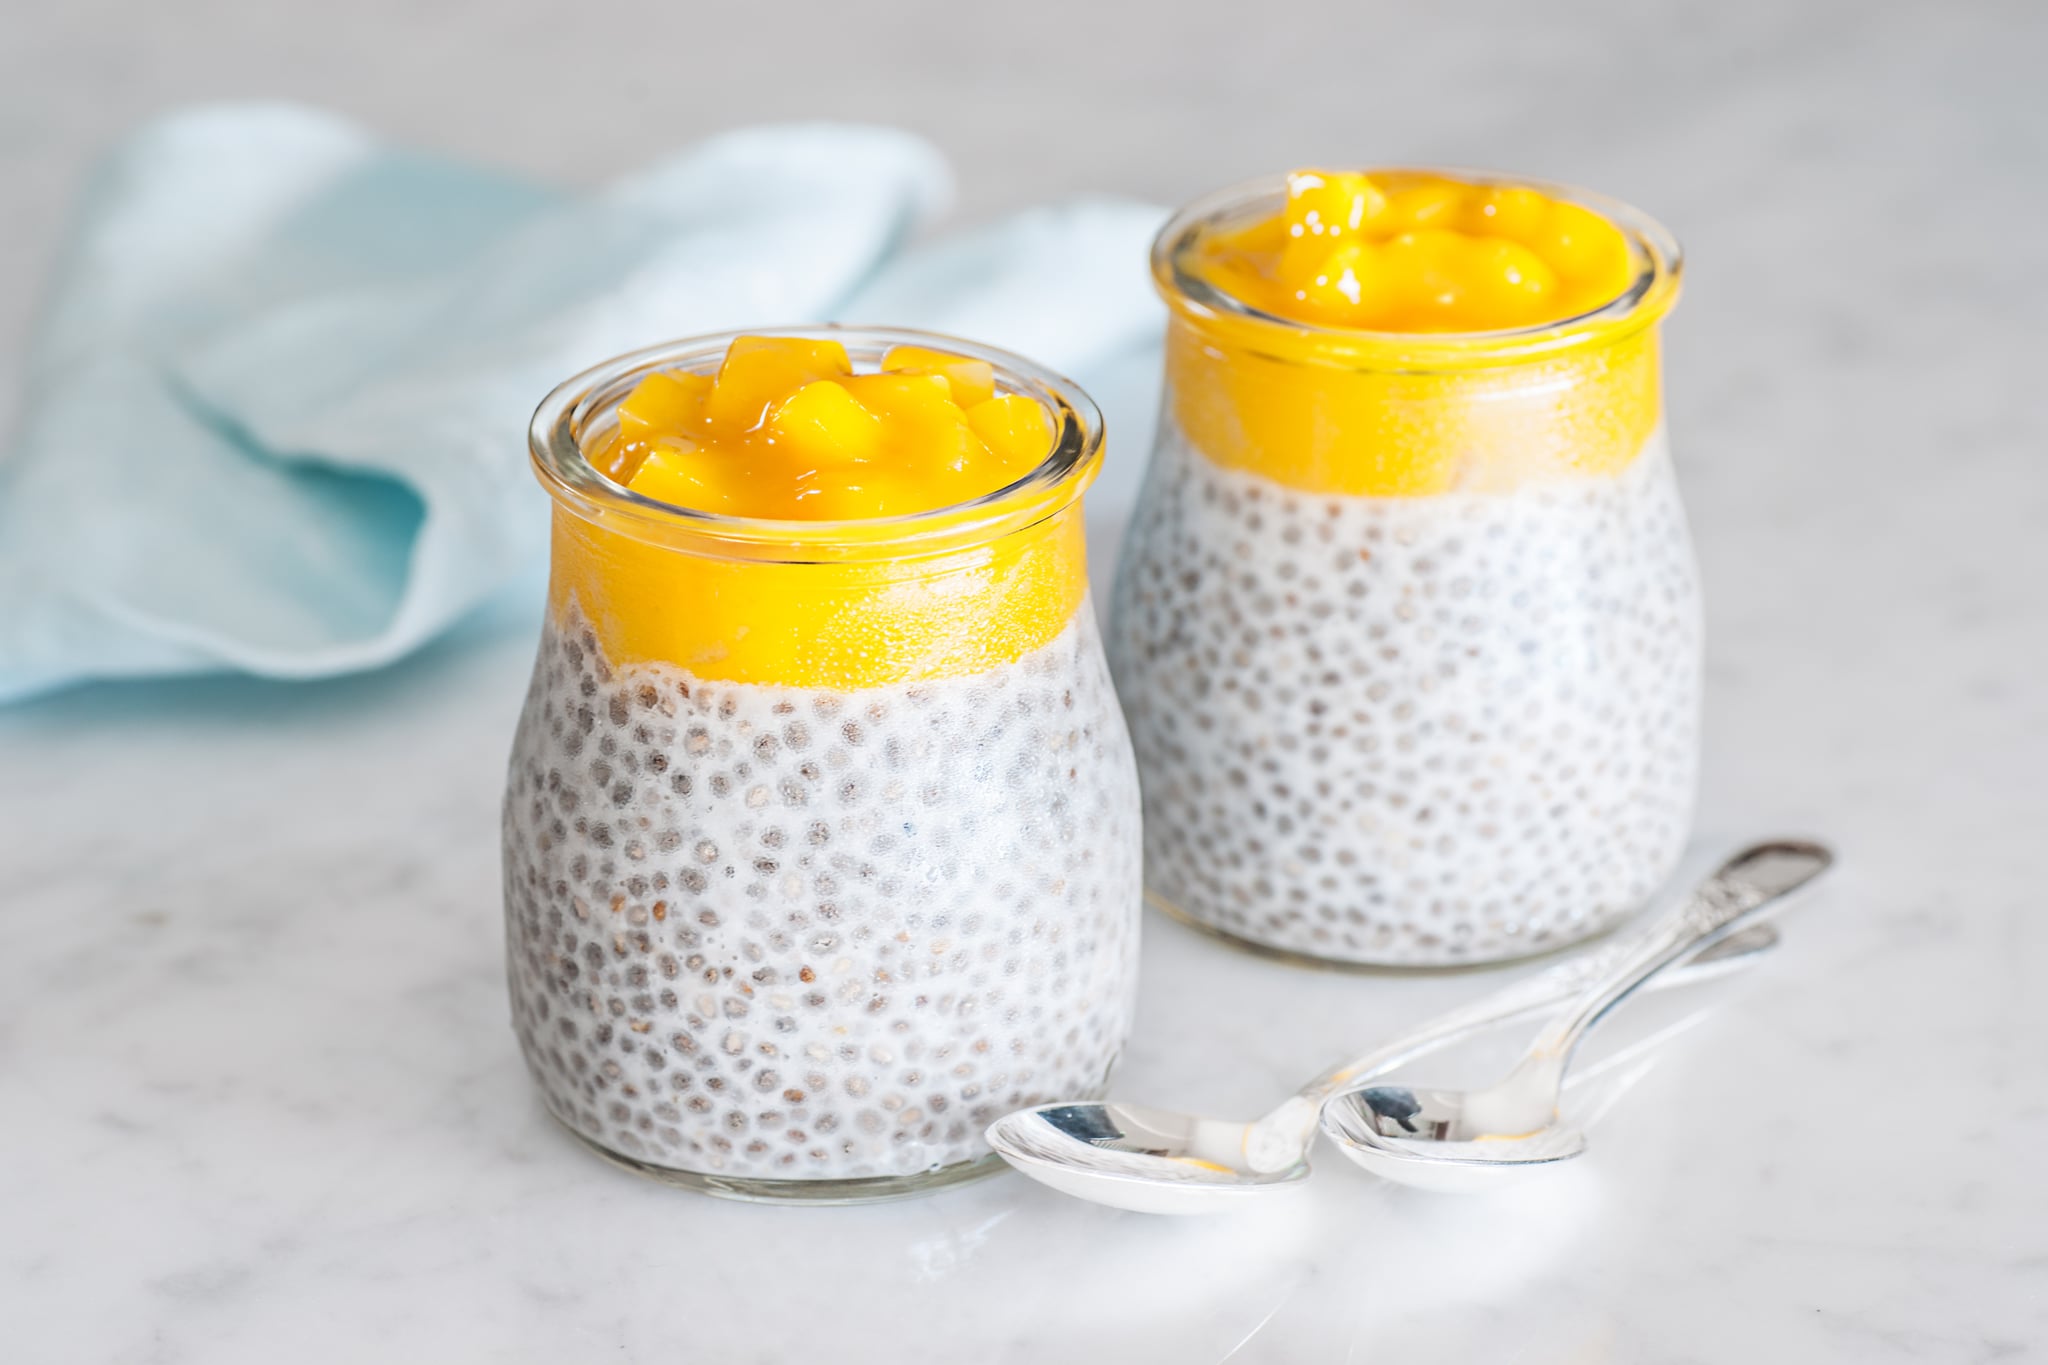 What are chia seeds in water used for?